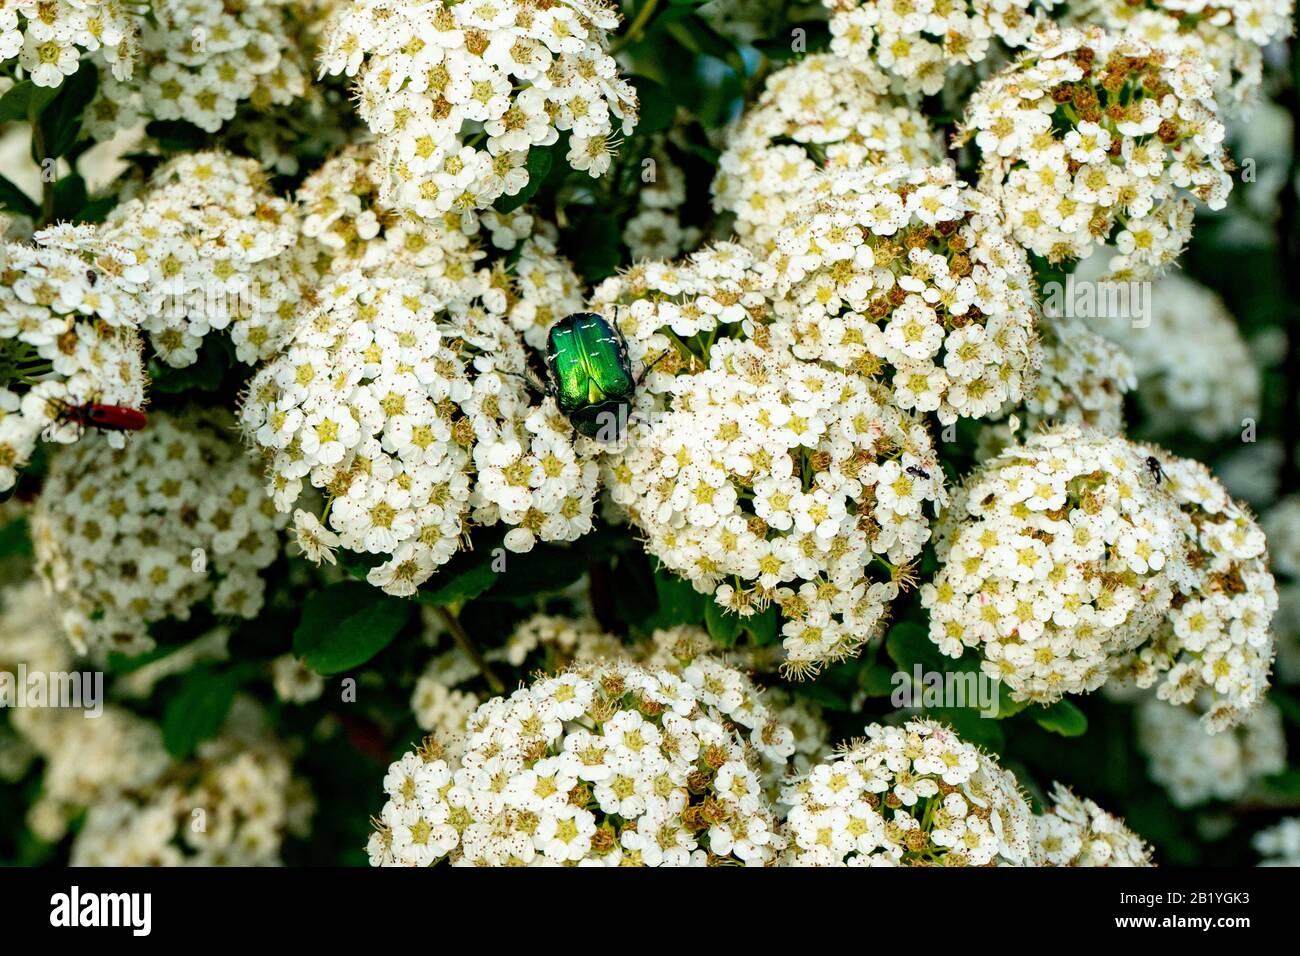 Blooming spirea or meadowsweet. Branches with white flowers. Beetle Eats Nectar. Stock Photo